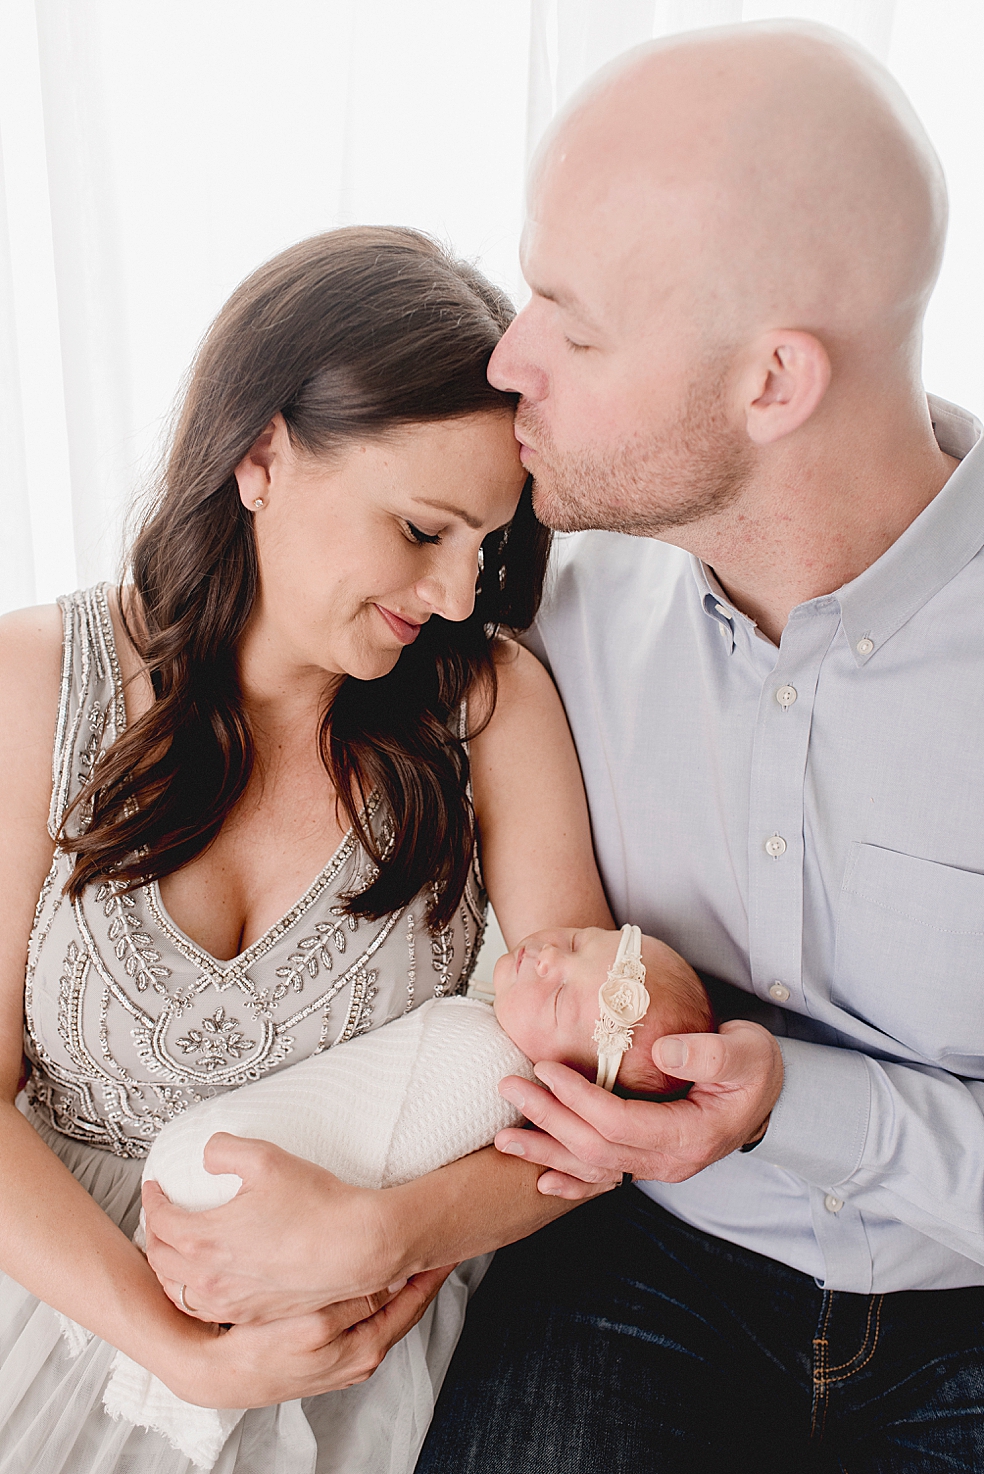 Mom and dad snuggling new baby girl | Photo by Decatur Alabama Newborn Photographer Jessica Lee 